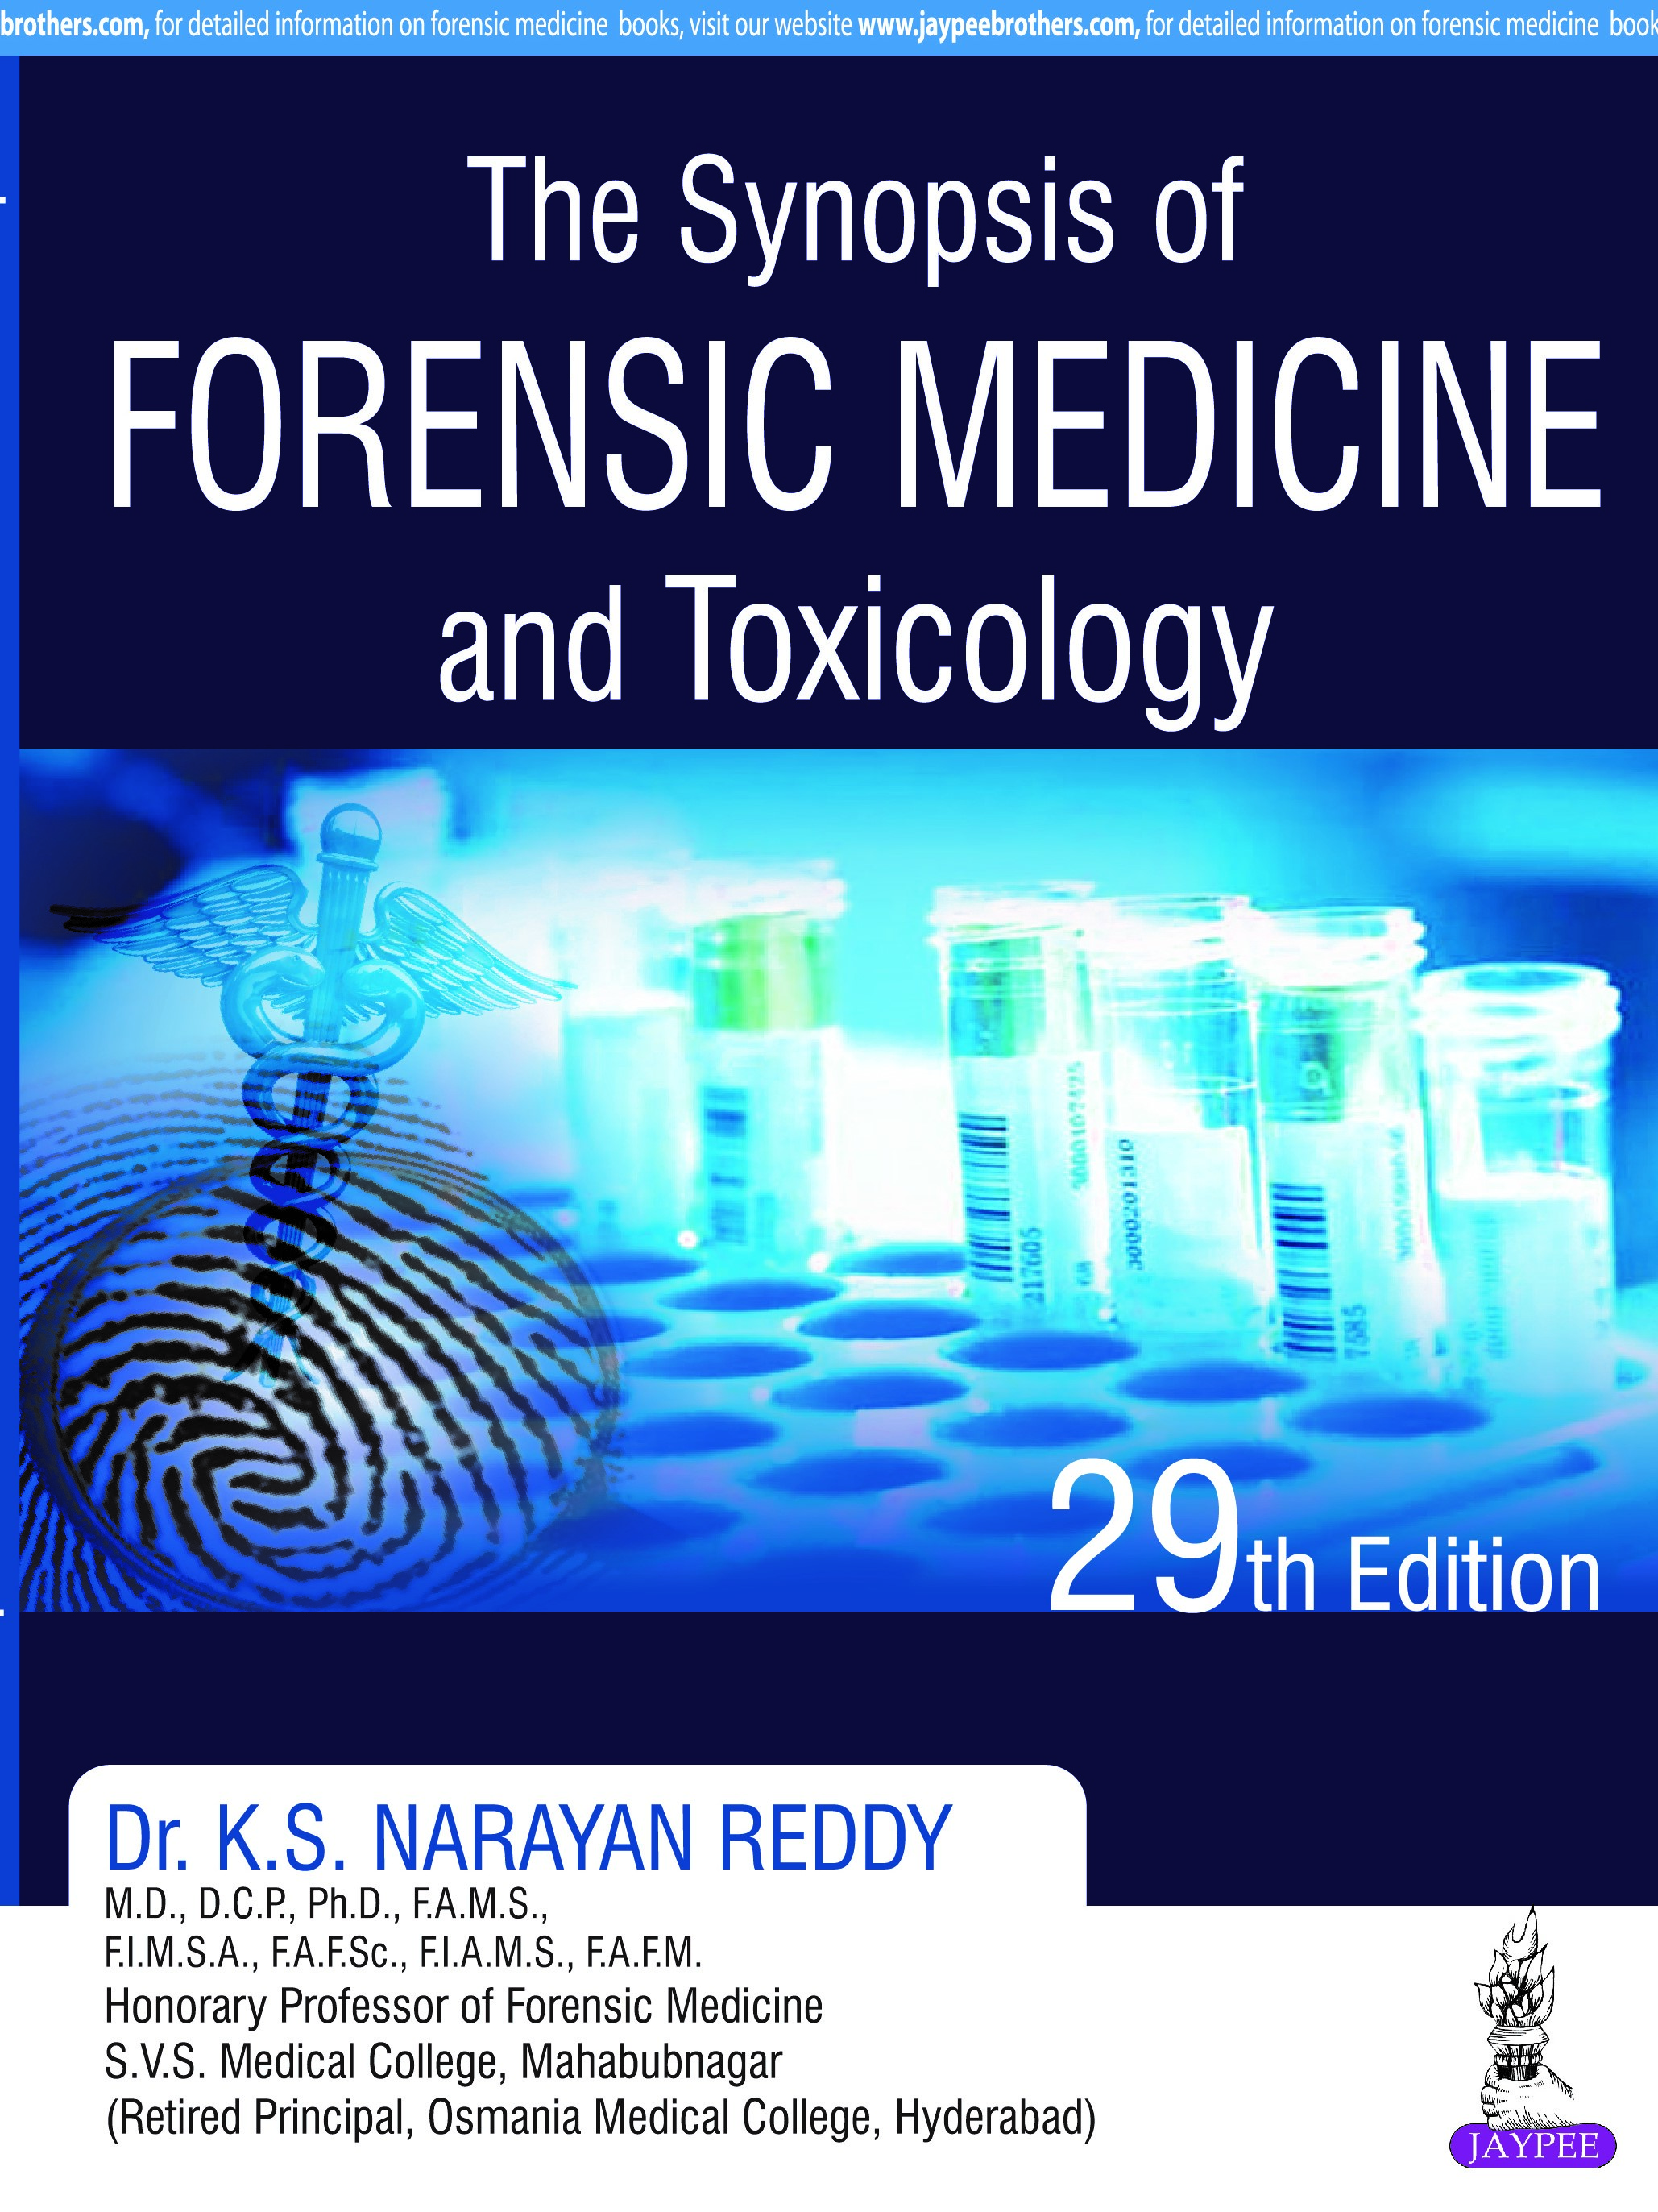 The Synopsis Of Forensic Medicine And Toxicology